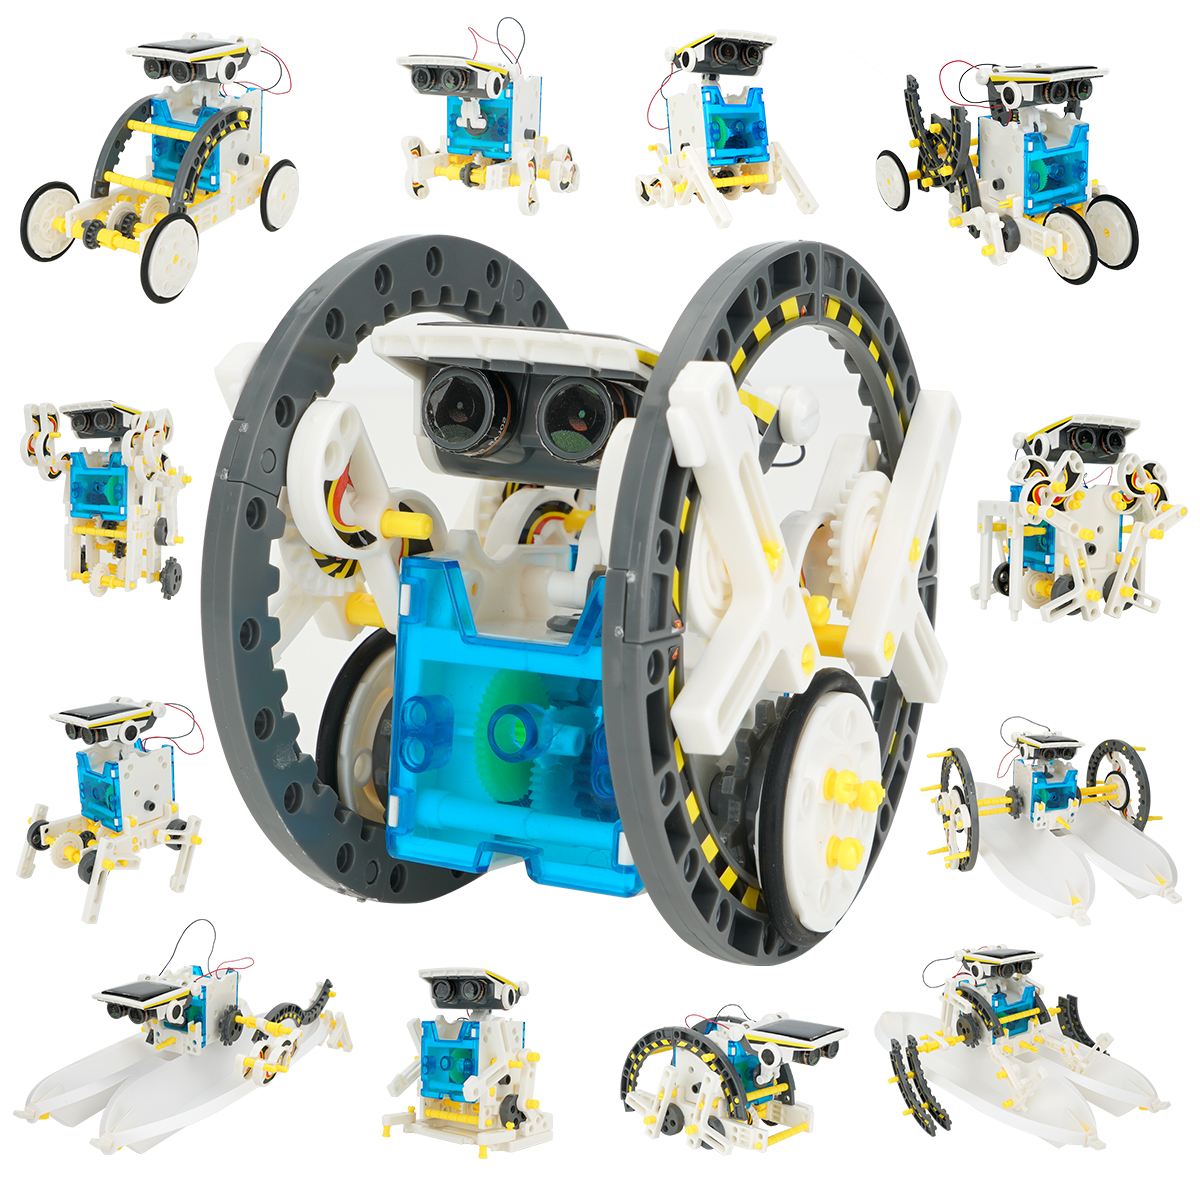 Find 13 in 1 Solar Robot STEM Toys Robot Kit for Educational Science Toys Learning Science experiments Model Kits for Sale on Gipsybee.com with cryptocurrencies